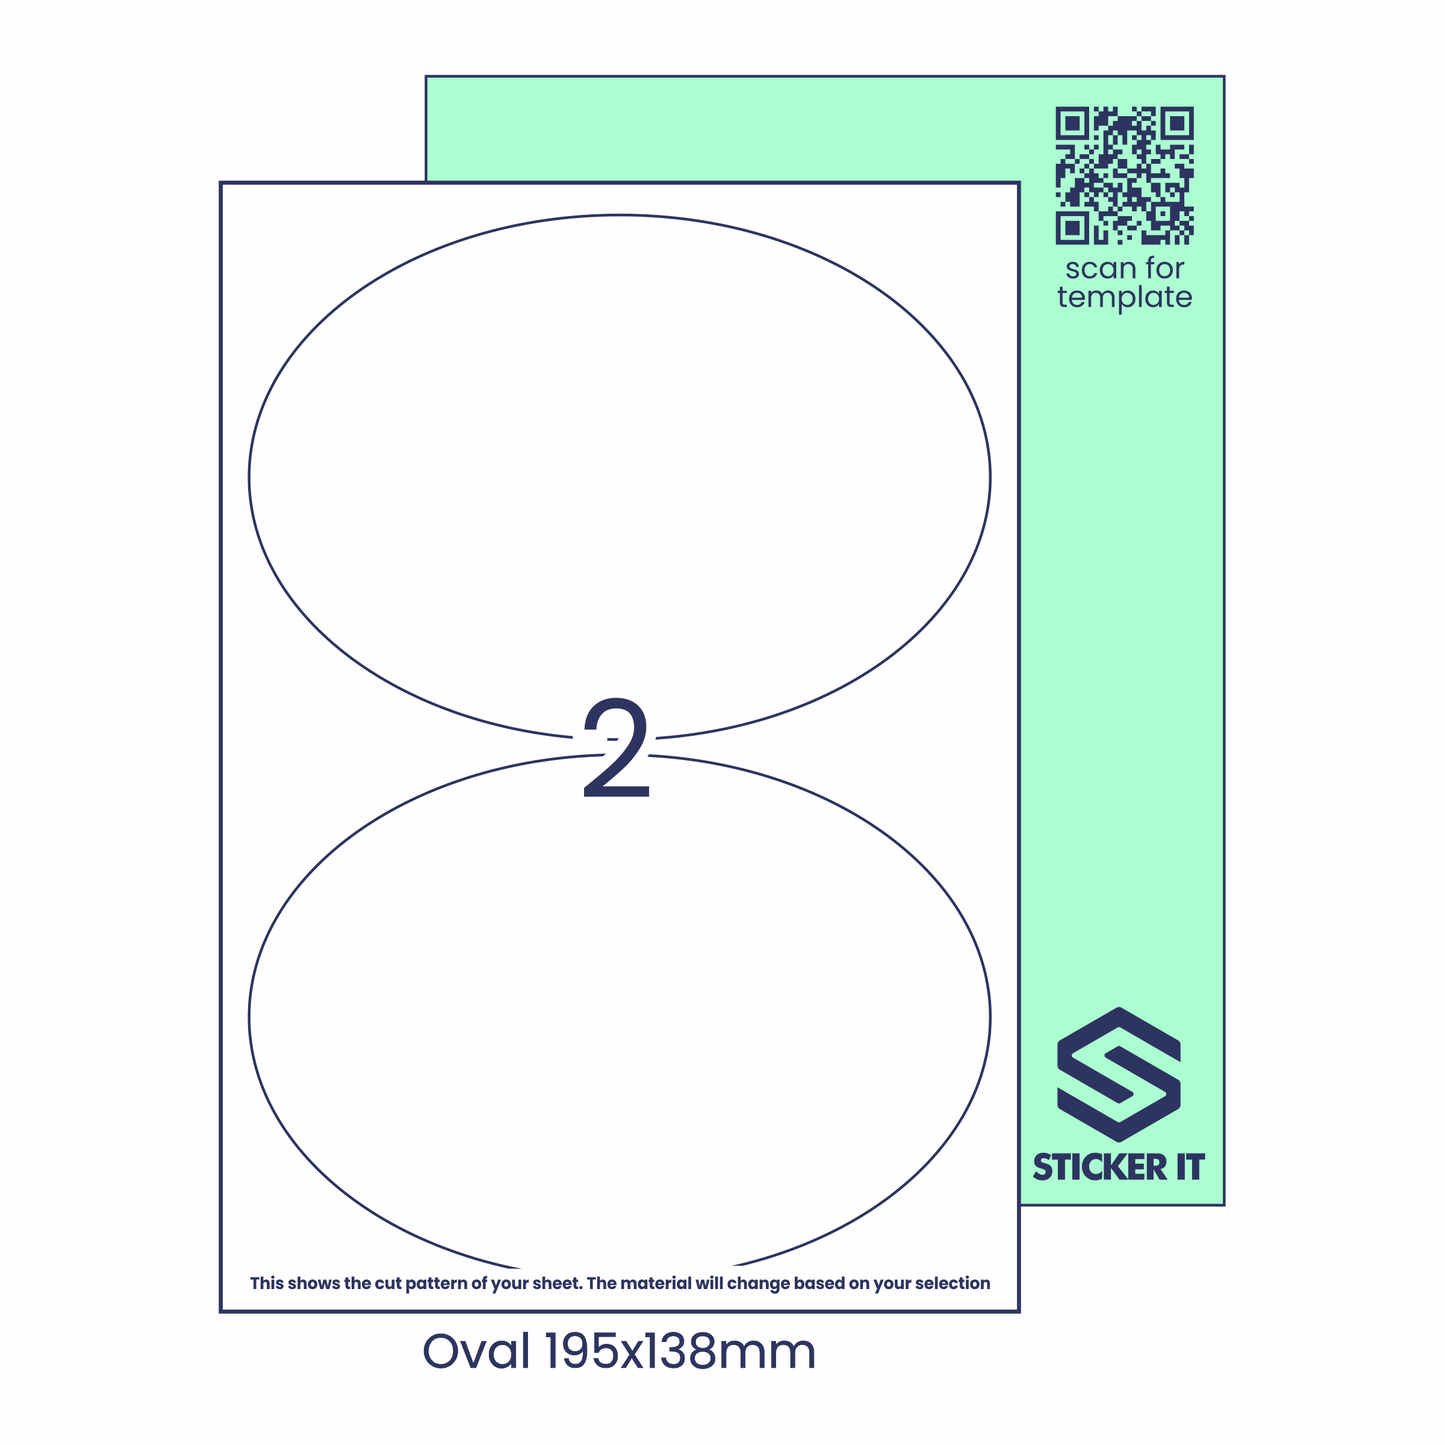 Blank labels oval 195x138 2 image